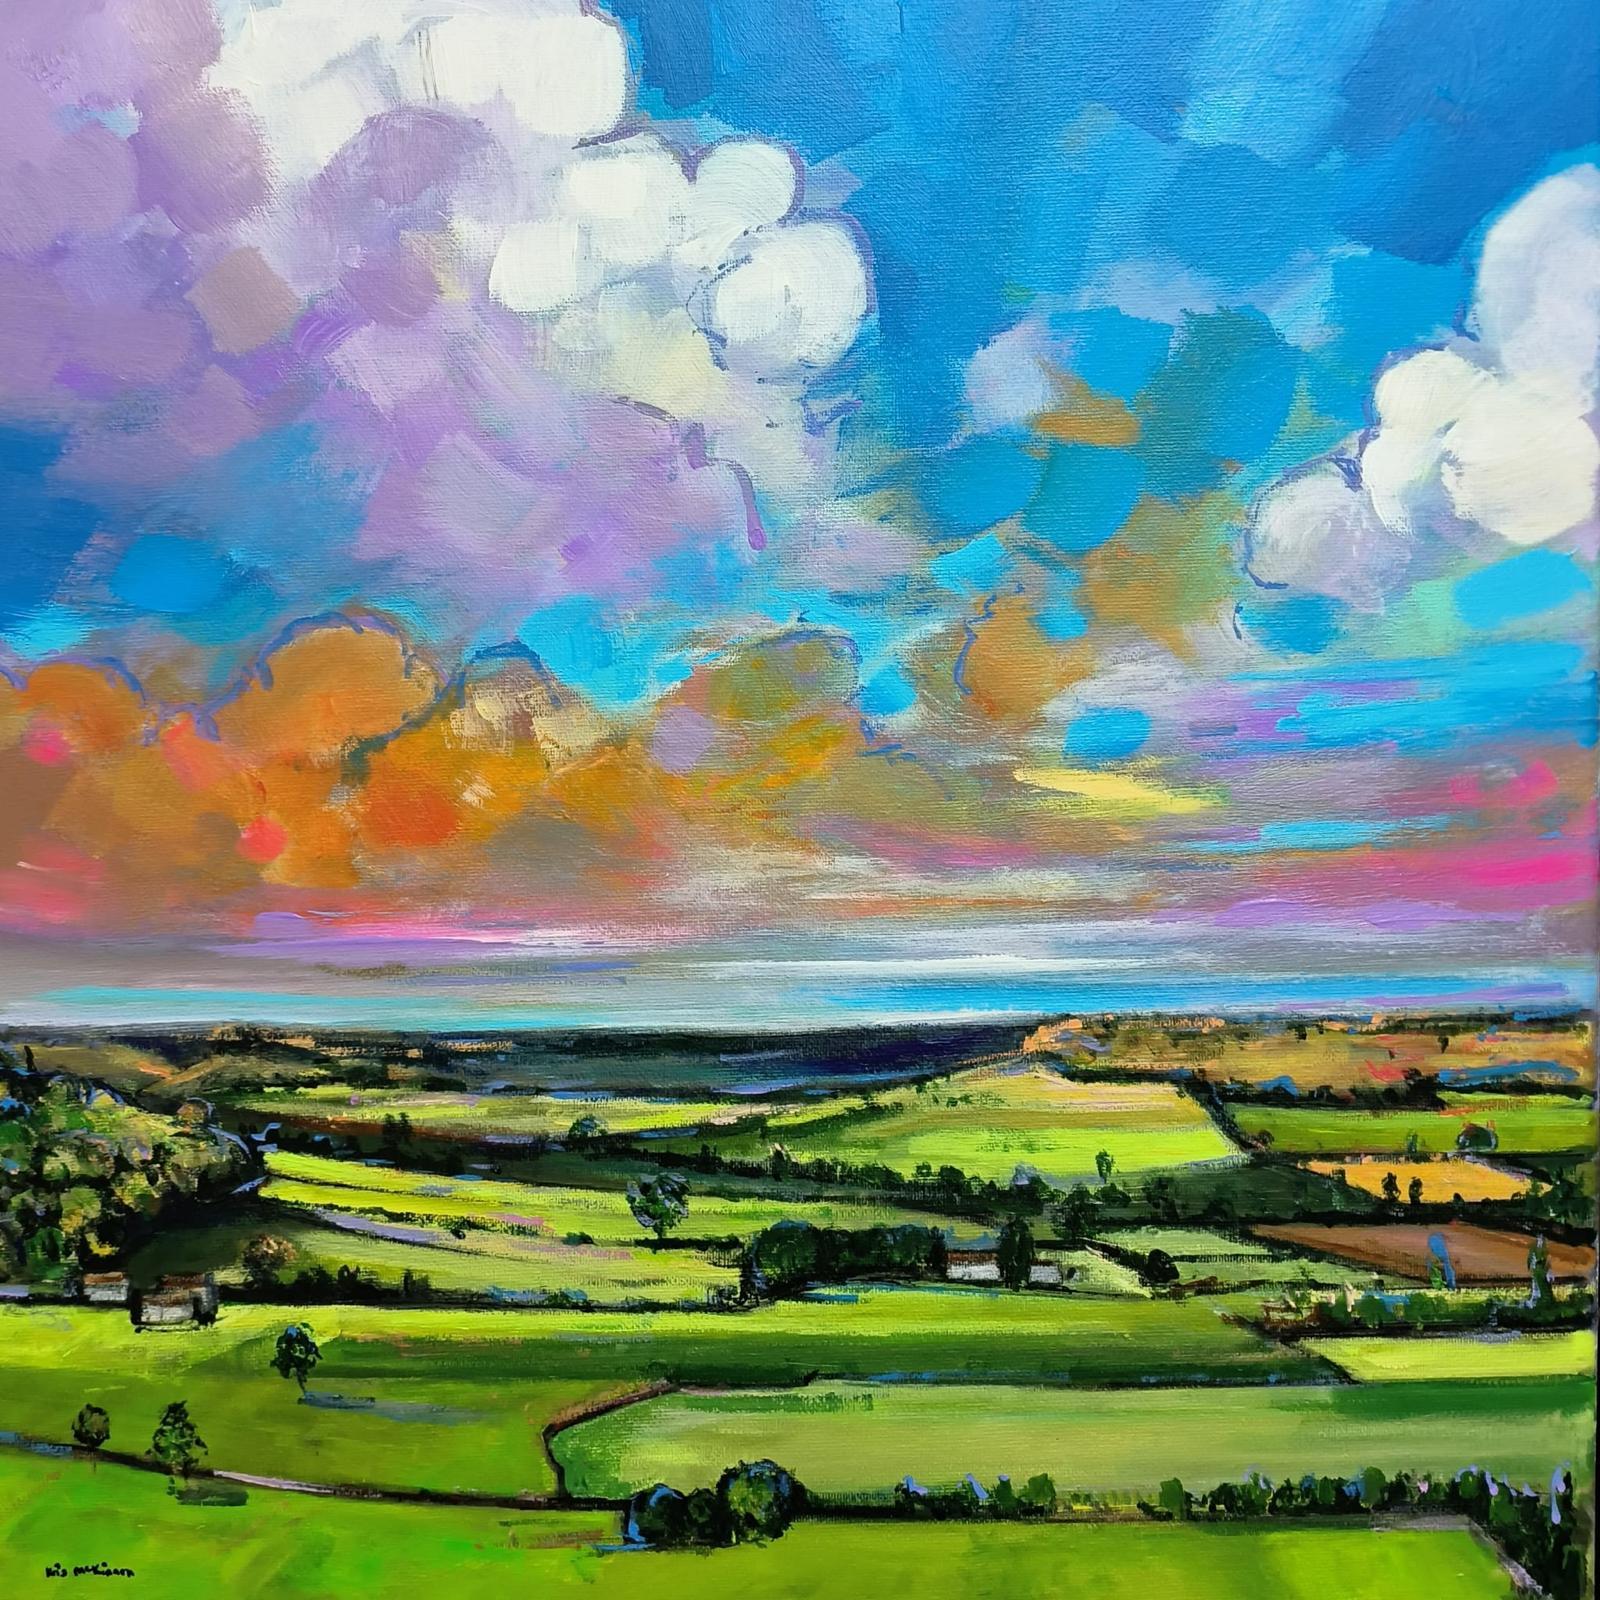 Kris McKinnon Landscape Painting - Straw On The Wild Landscape, Original painting, Countryside, Rural, Colourful